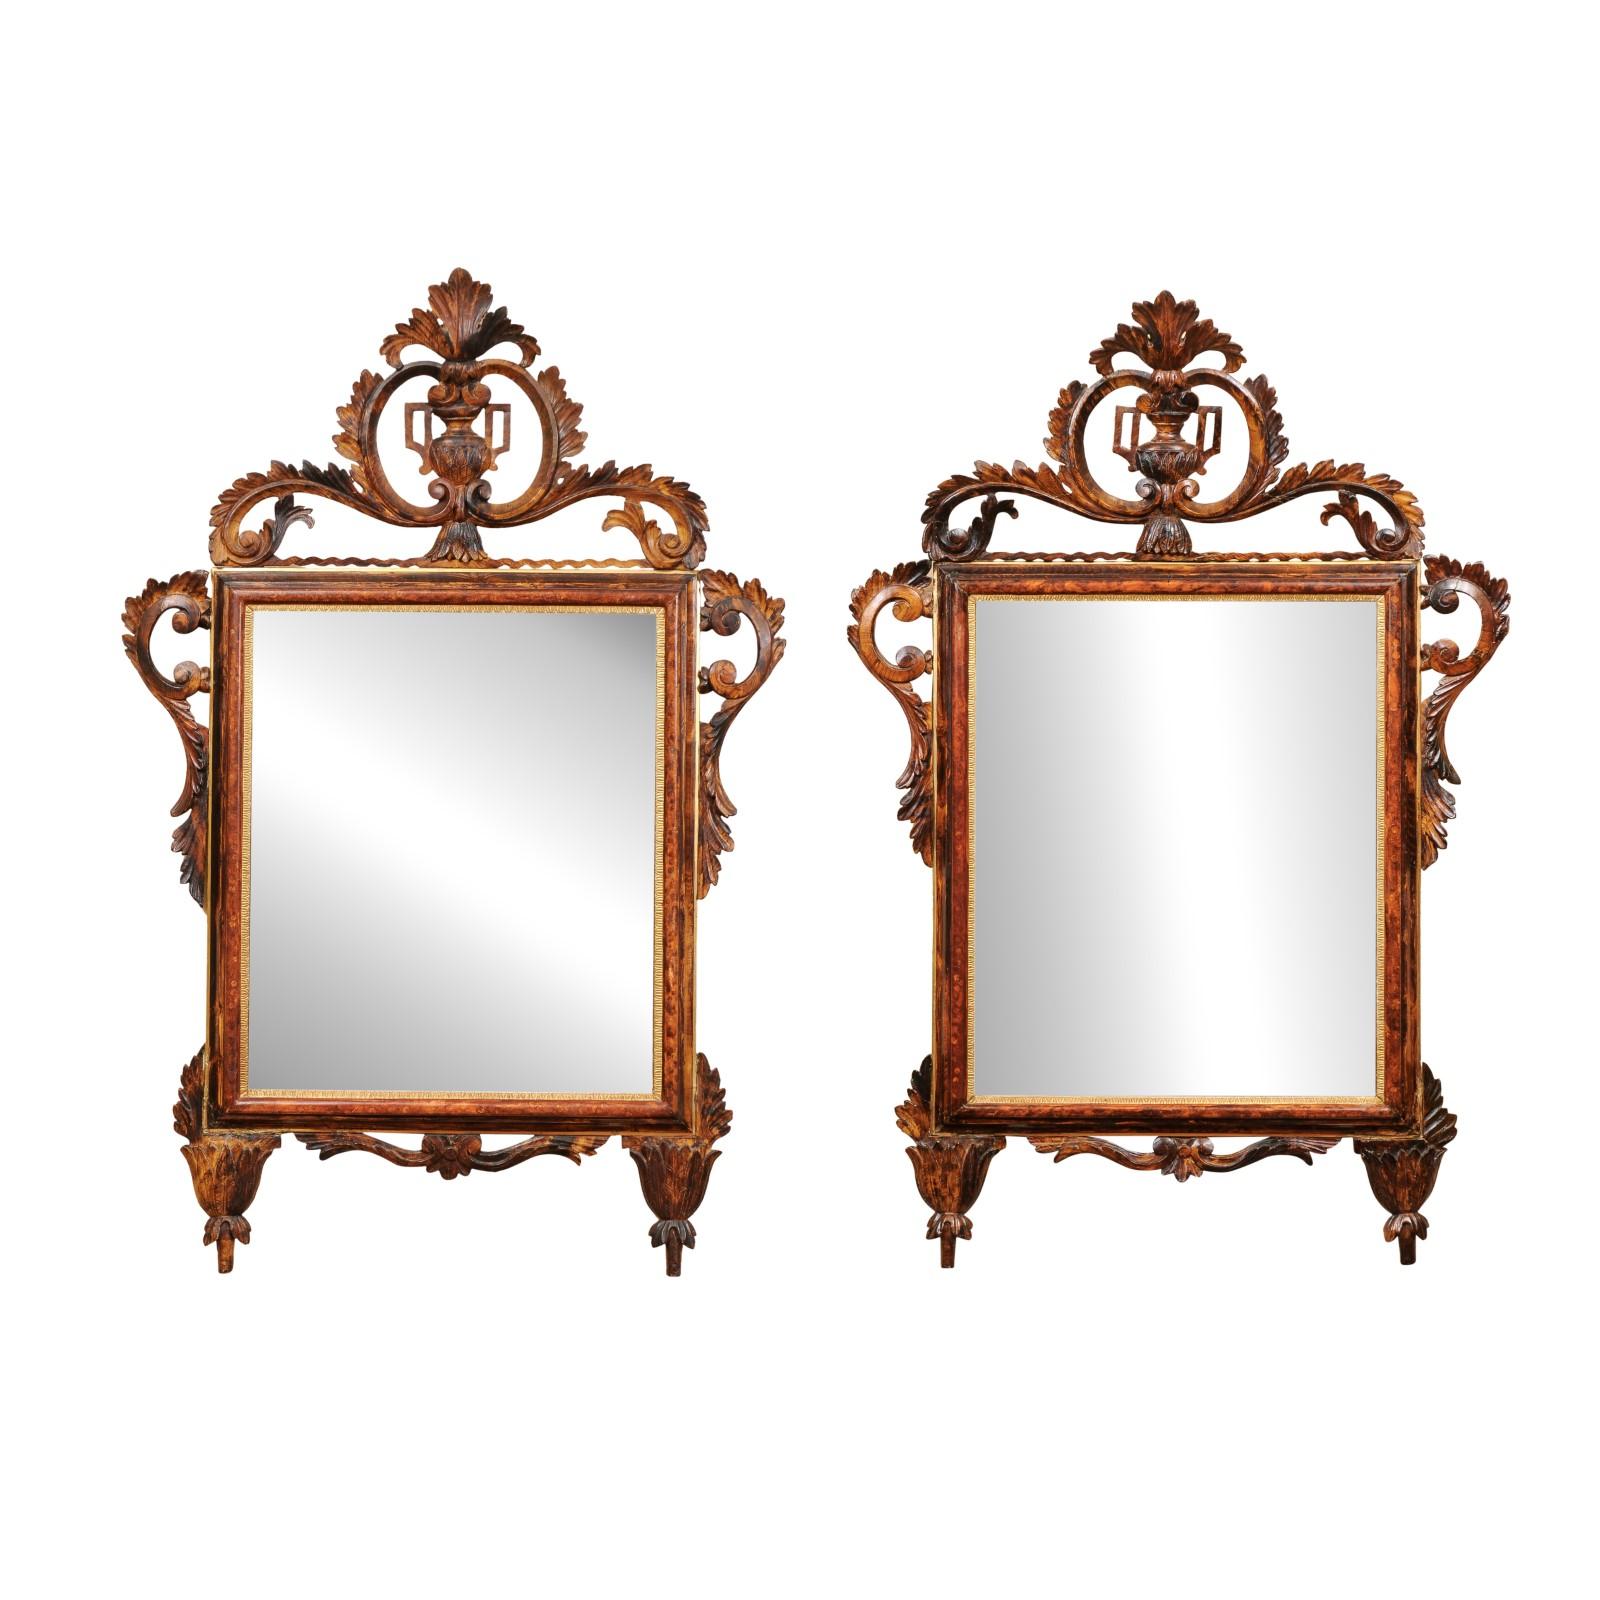 Pair of 18th Century Italian Neoclassical Faux Grain Painted Mirrors with Urn Crests, ca. 1790